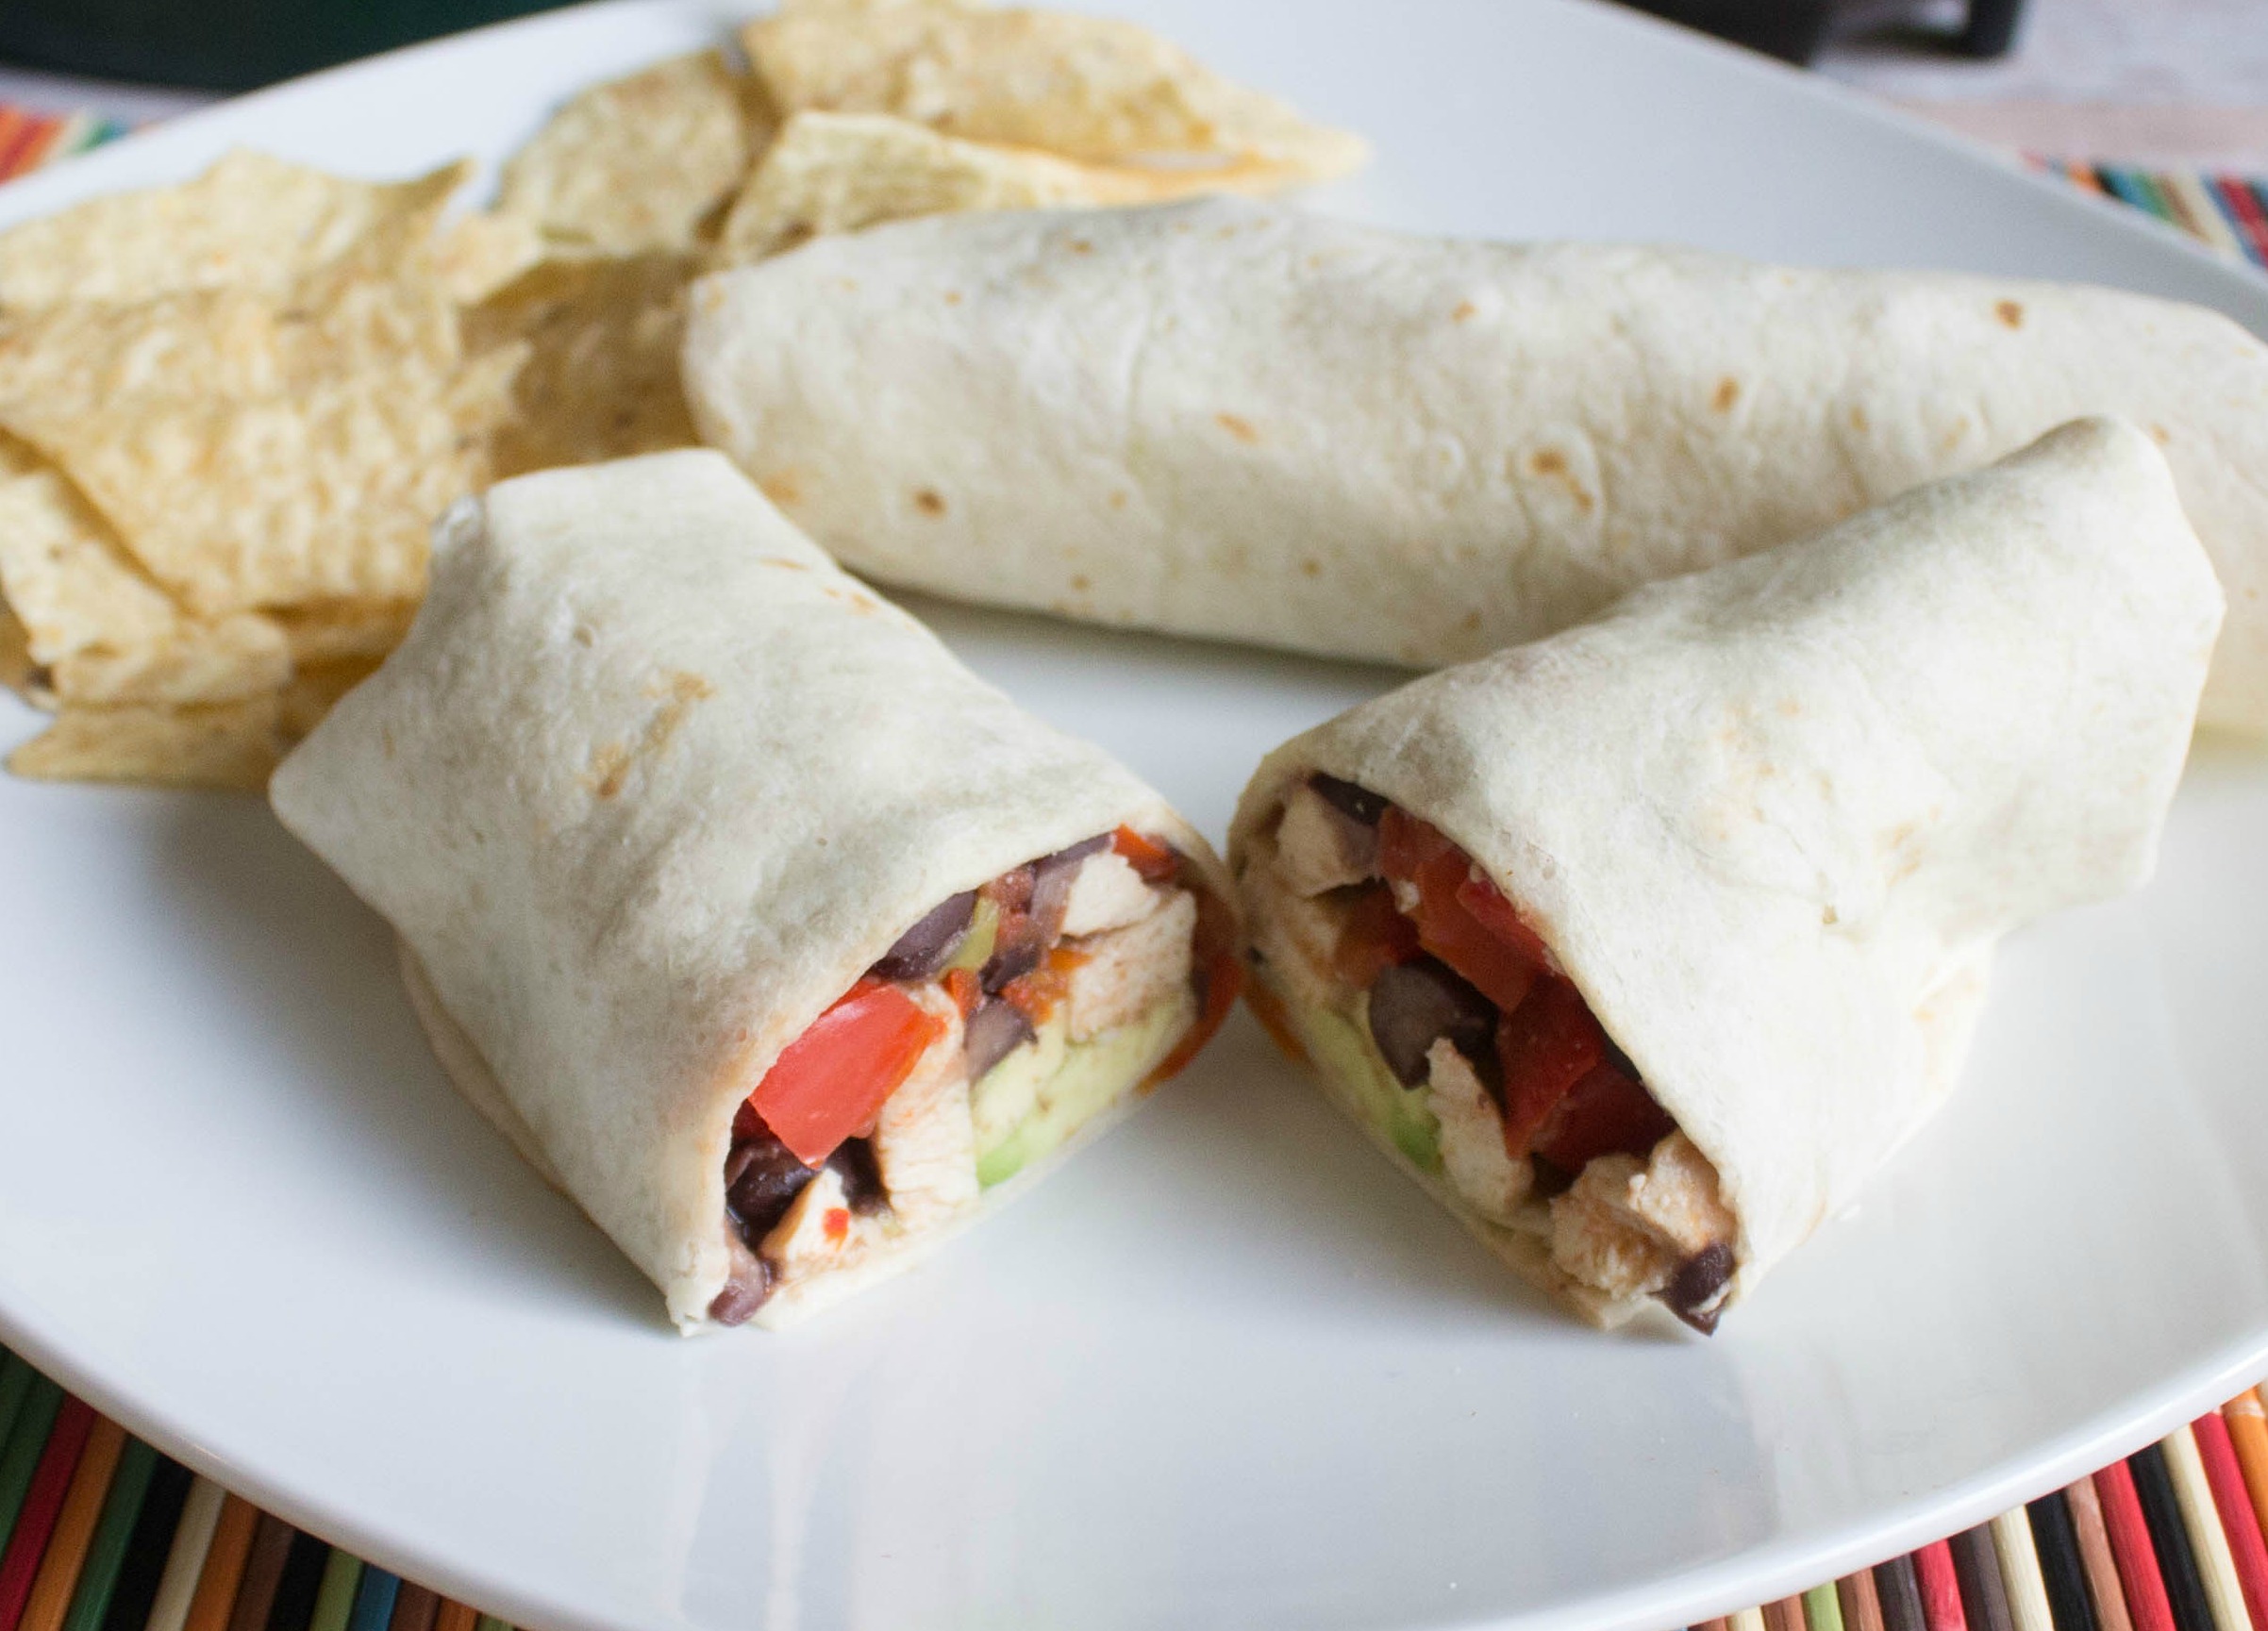 A quick and easy recipe for black bean and chicken burritos